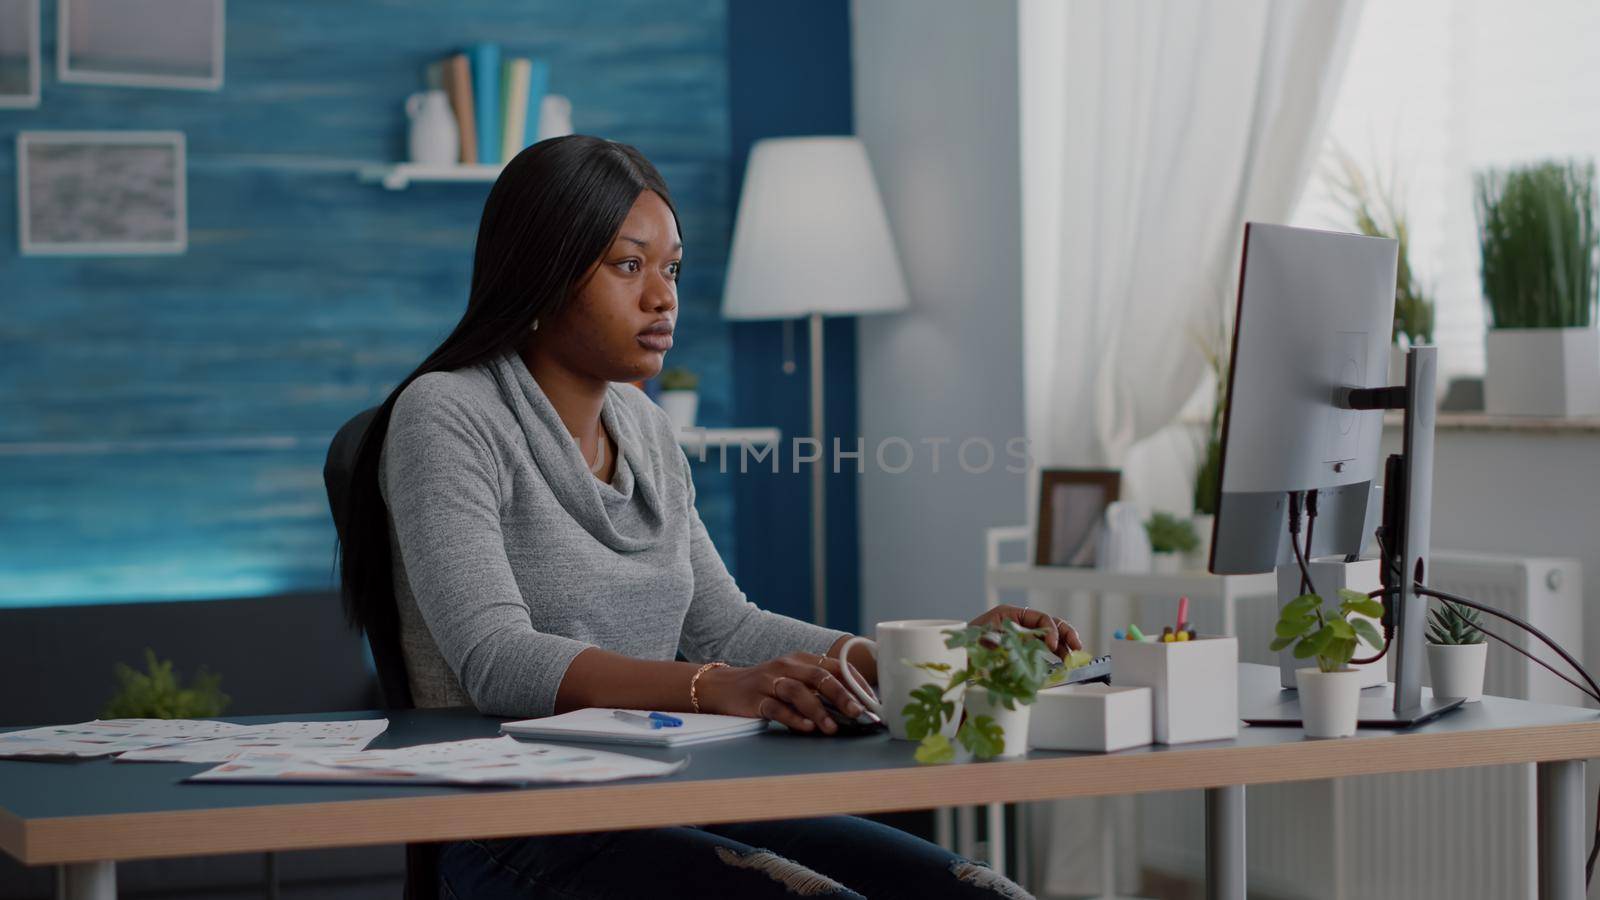 African american student with dark skin working remote from home at marketing online course using elearning university platform. Computer user sitting at desk table in living room browsing information